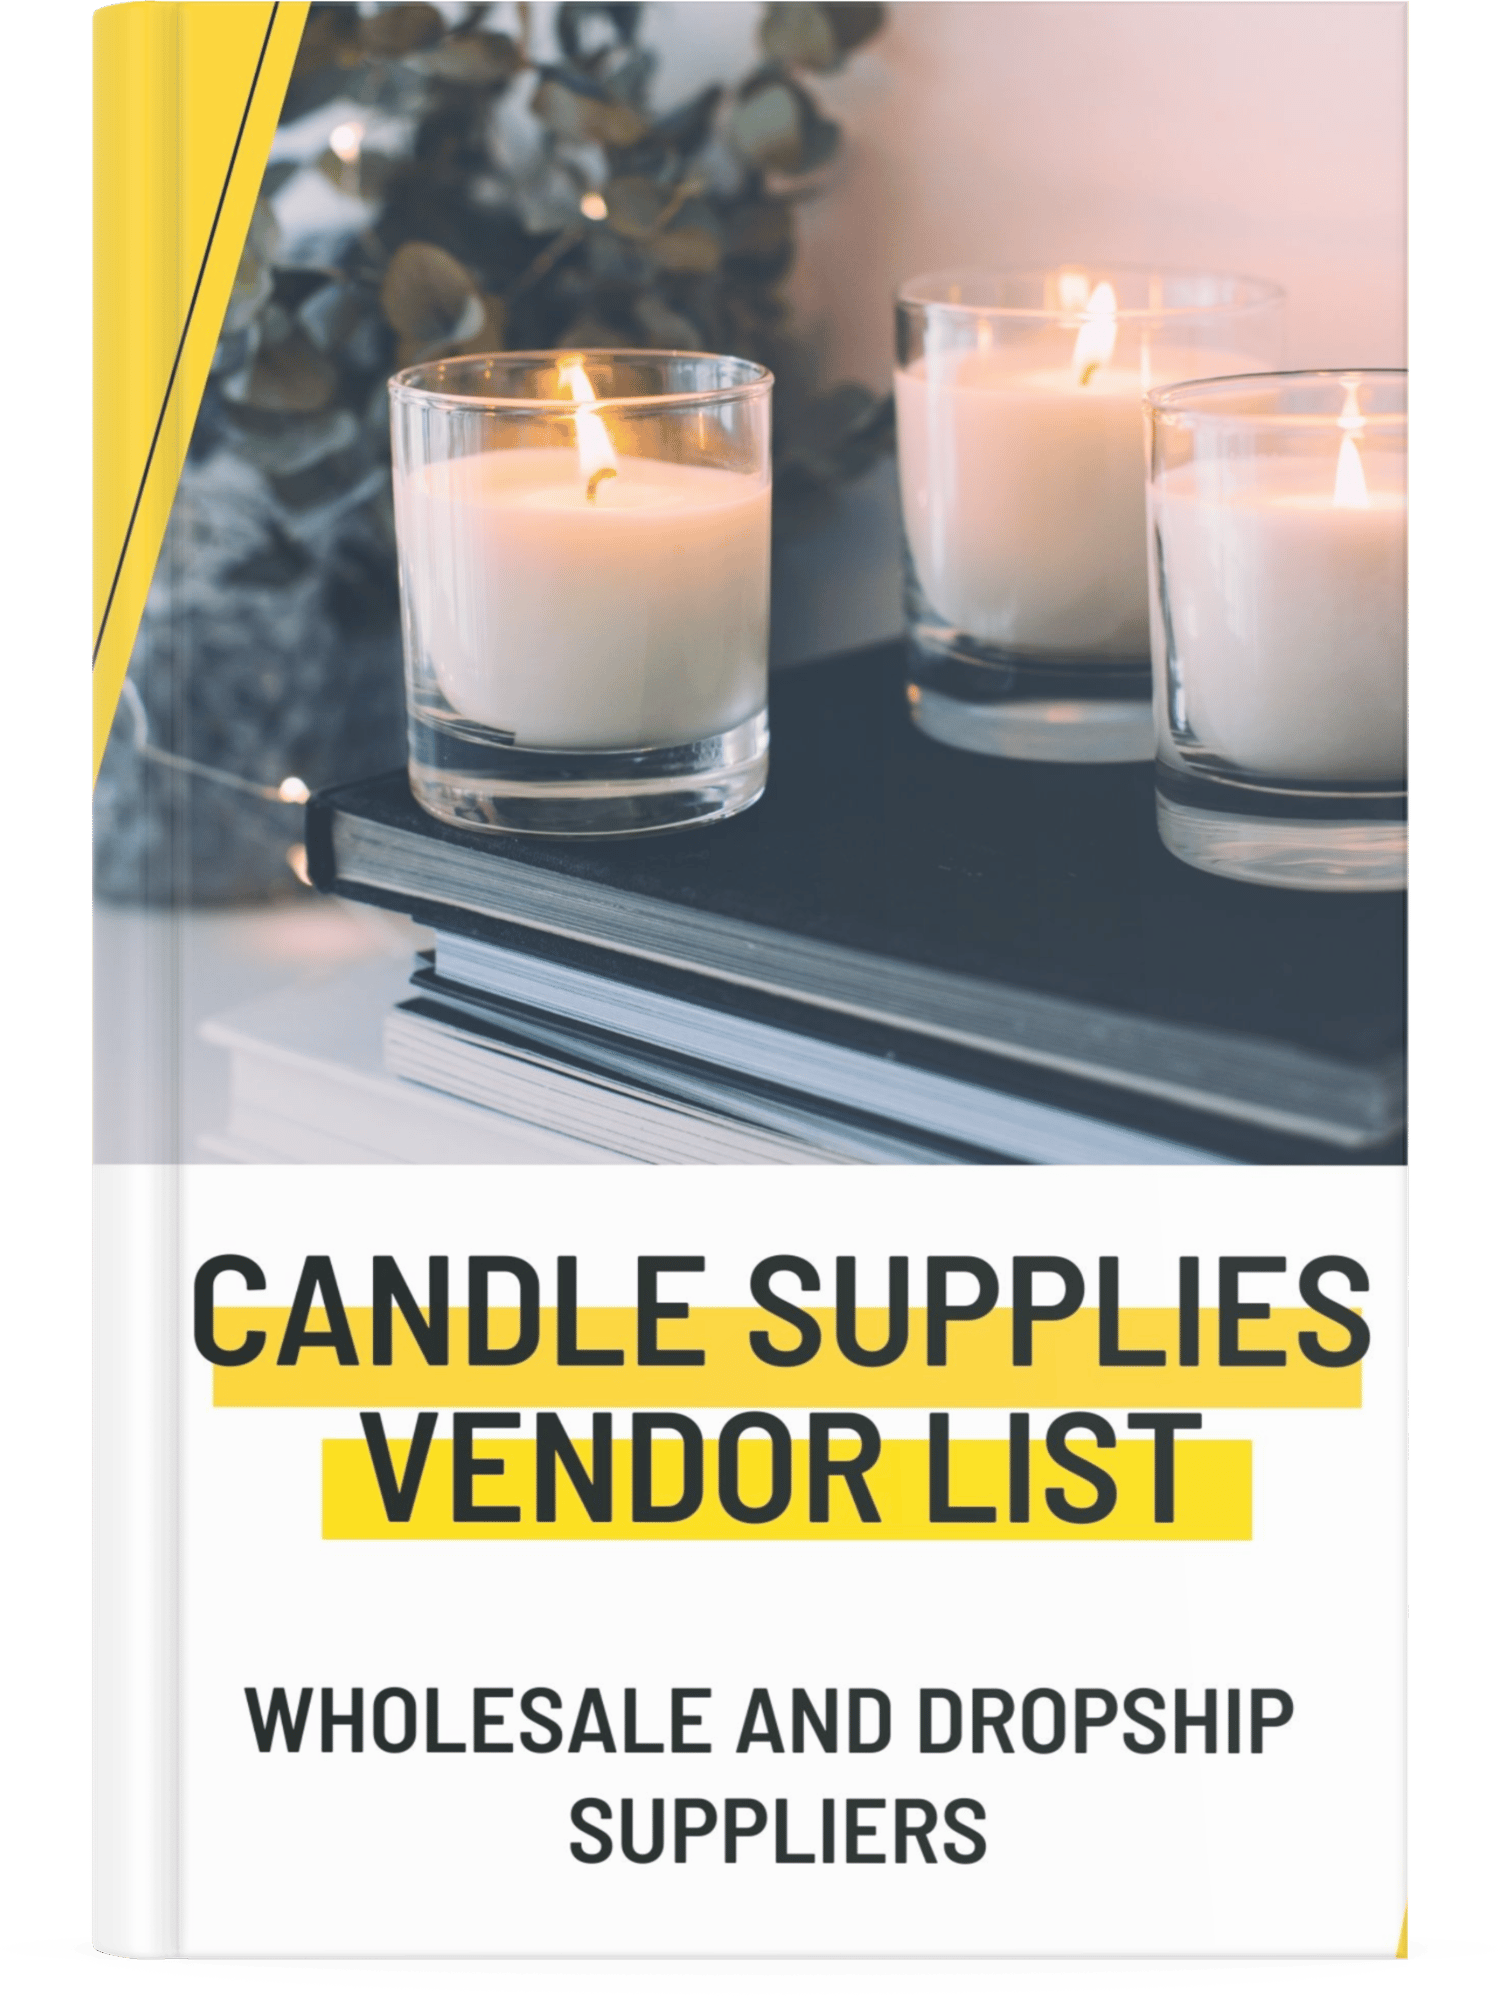 Candle Making Equipment Guide for Beginners (An Overview)